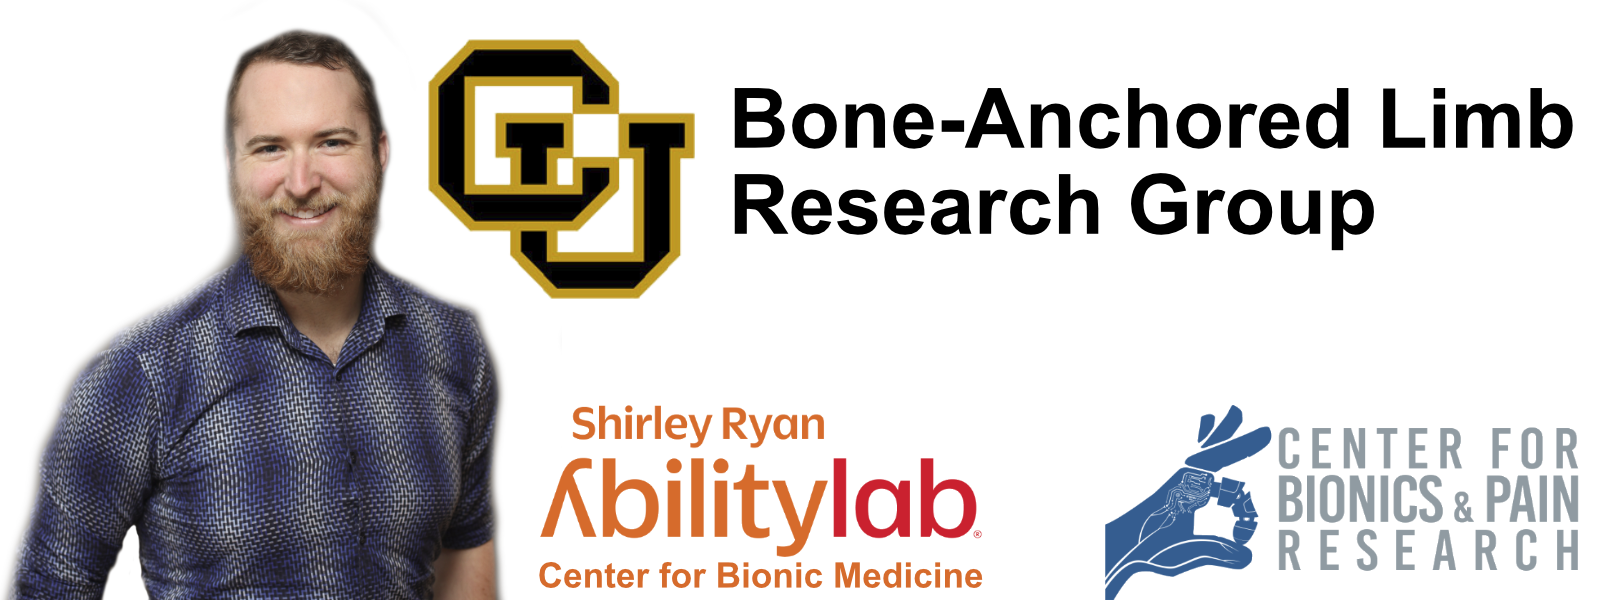 A black-and-white header photo of me wearing a suit. To the left are the logos of the Shirley Ryan AbilityLab, Northwestern University, and Center for Bionics and Pain Research.